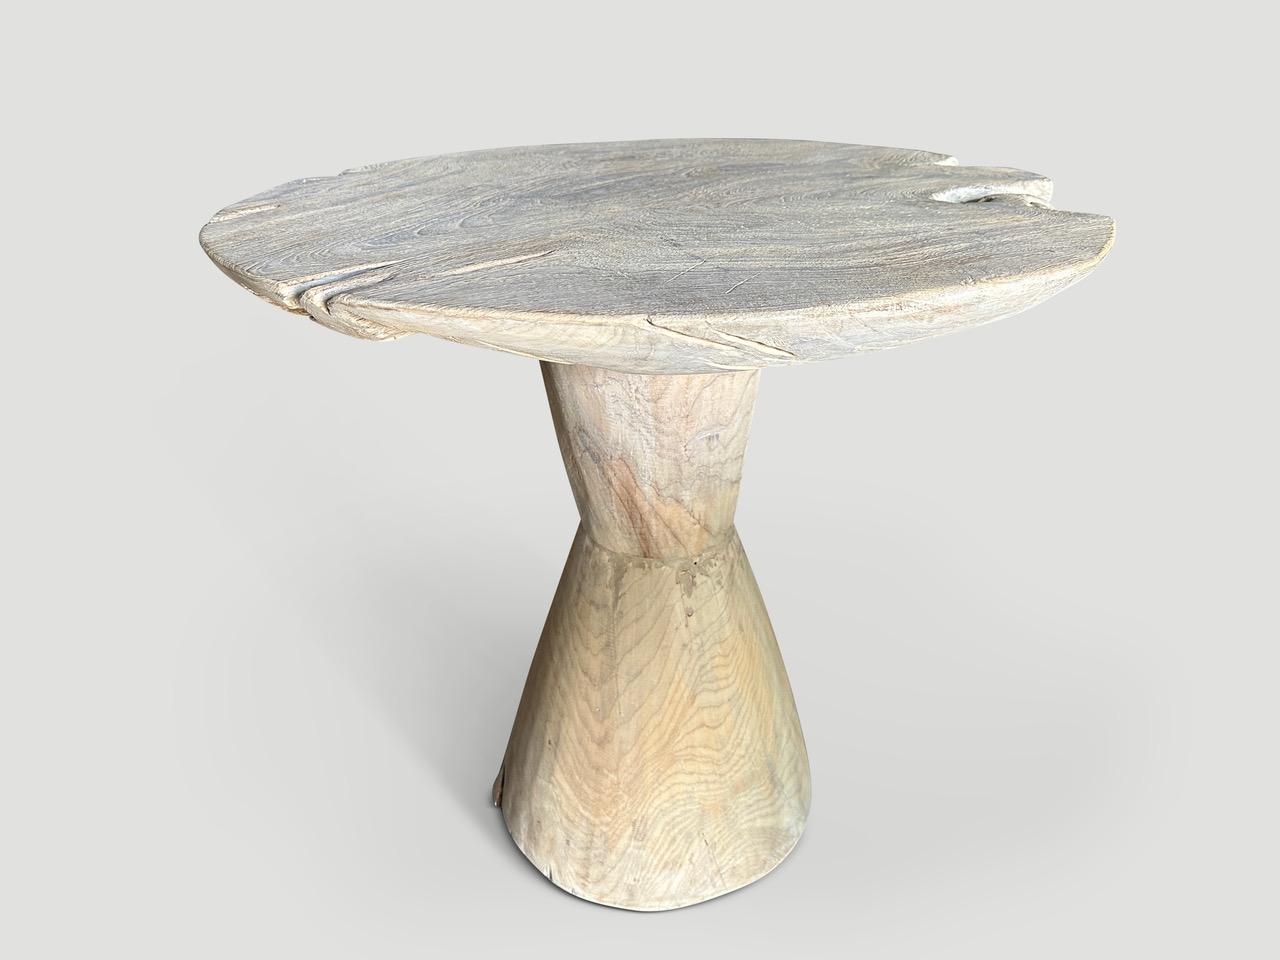 A single aged organic slab of reclaimed teak wood taken from my finest collection, is turned into a one of a kind table. The top is originally four inches thick which we have carved by hand to a dramatic bevel with soft smooth rounded sides. Shown